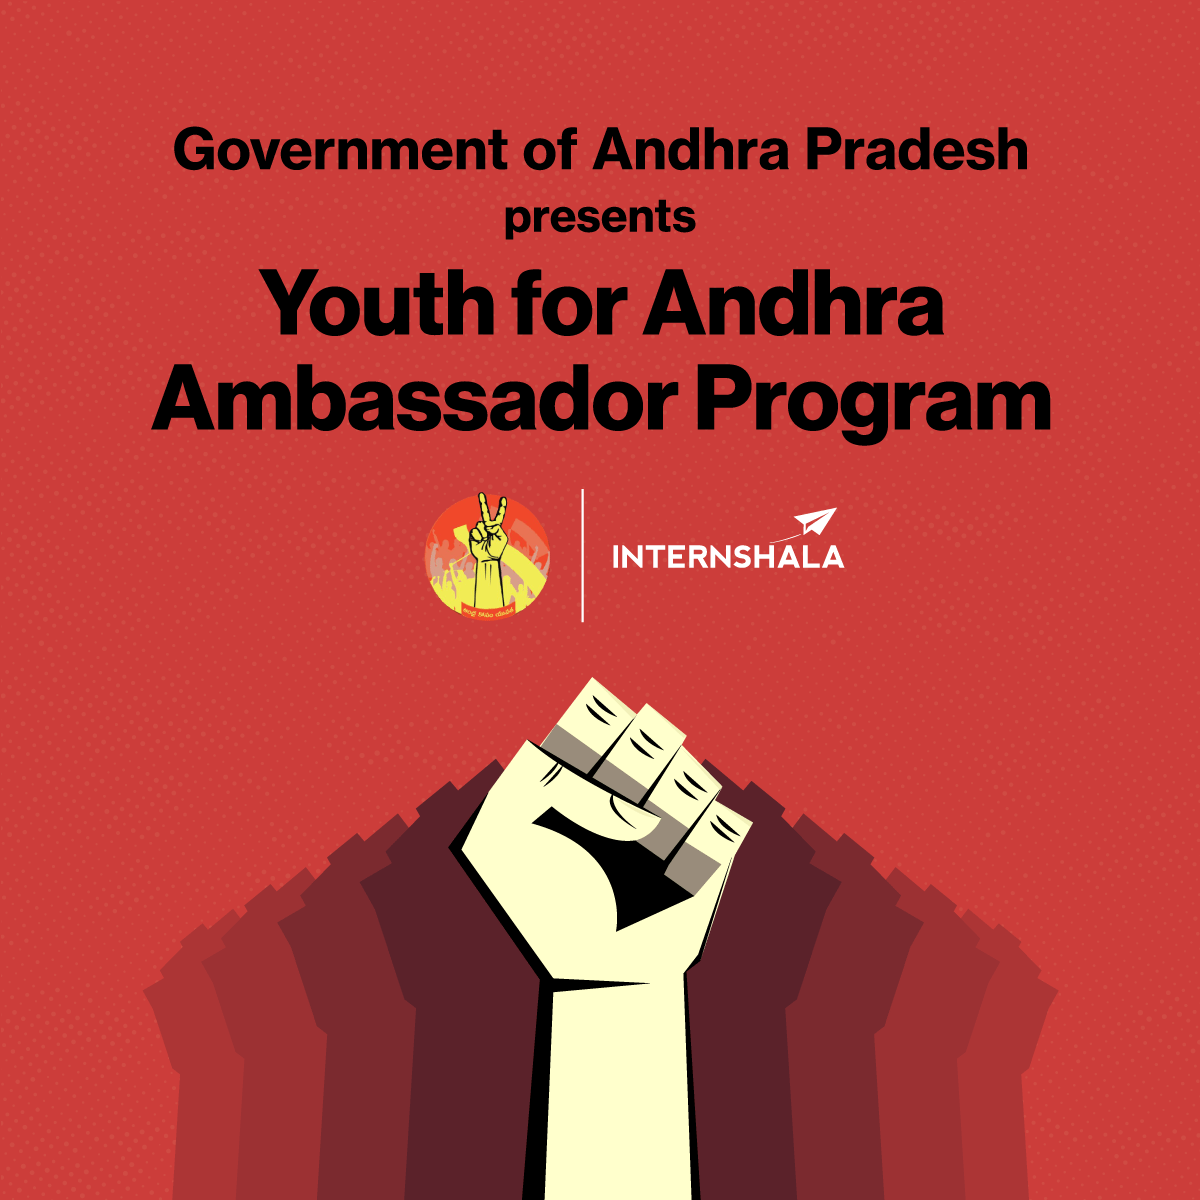 Government of Andhra Pradesh signs MoU with Internshala, launches ‘Youth for Andhra Program’